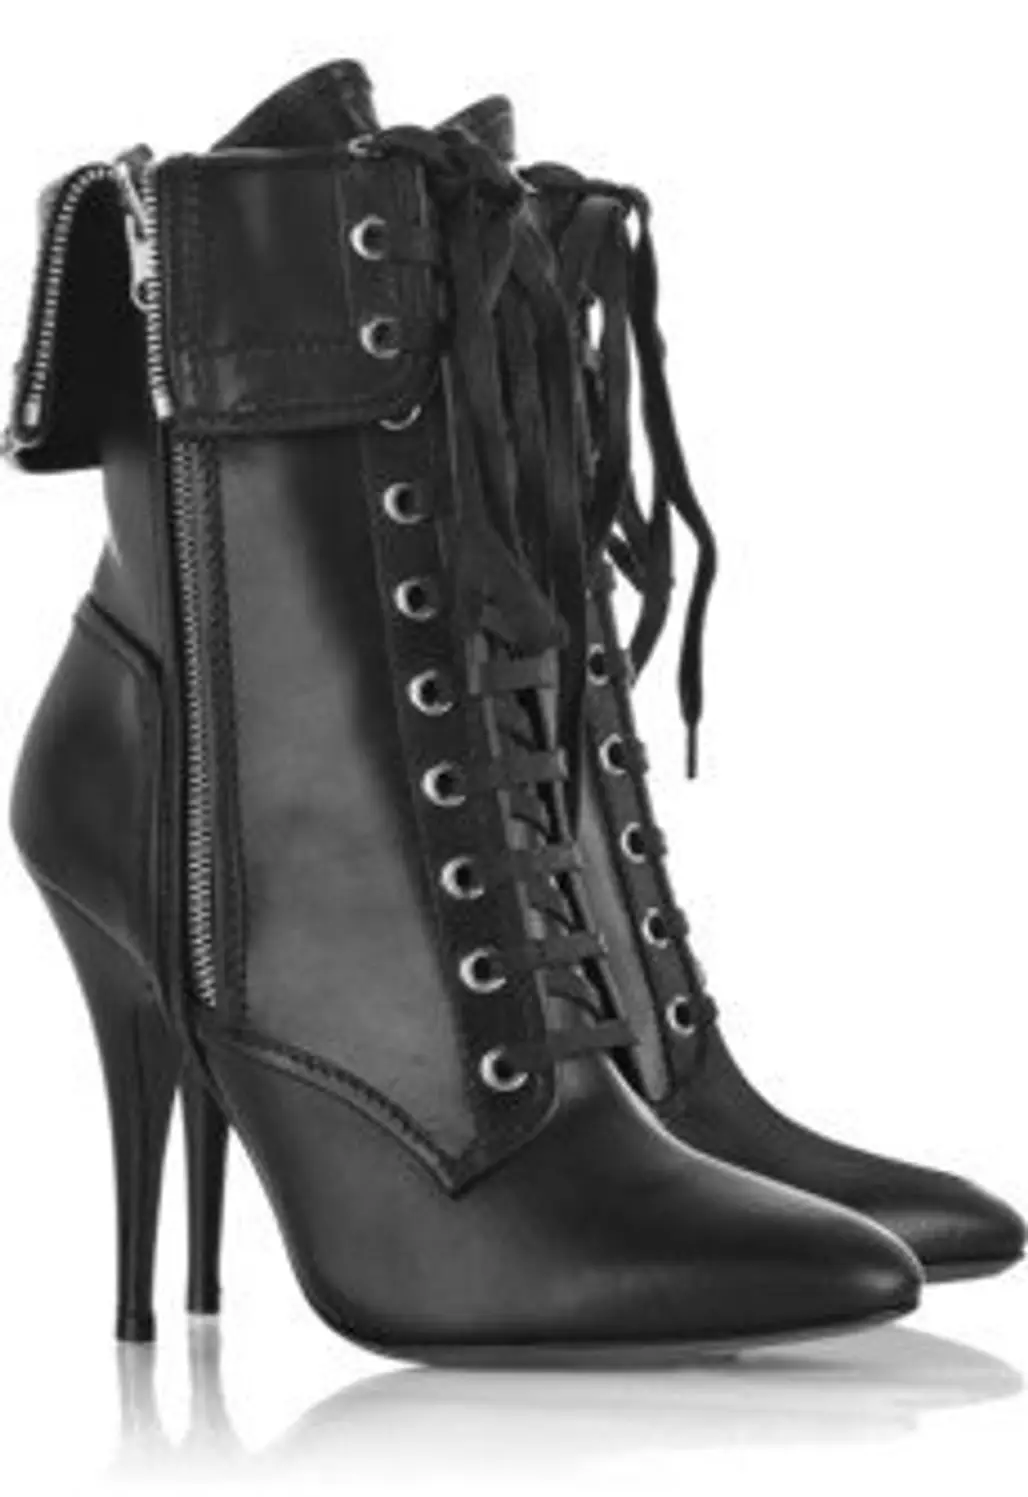 1. Balmain Lace up Leather Ankle Boots